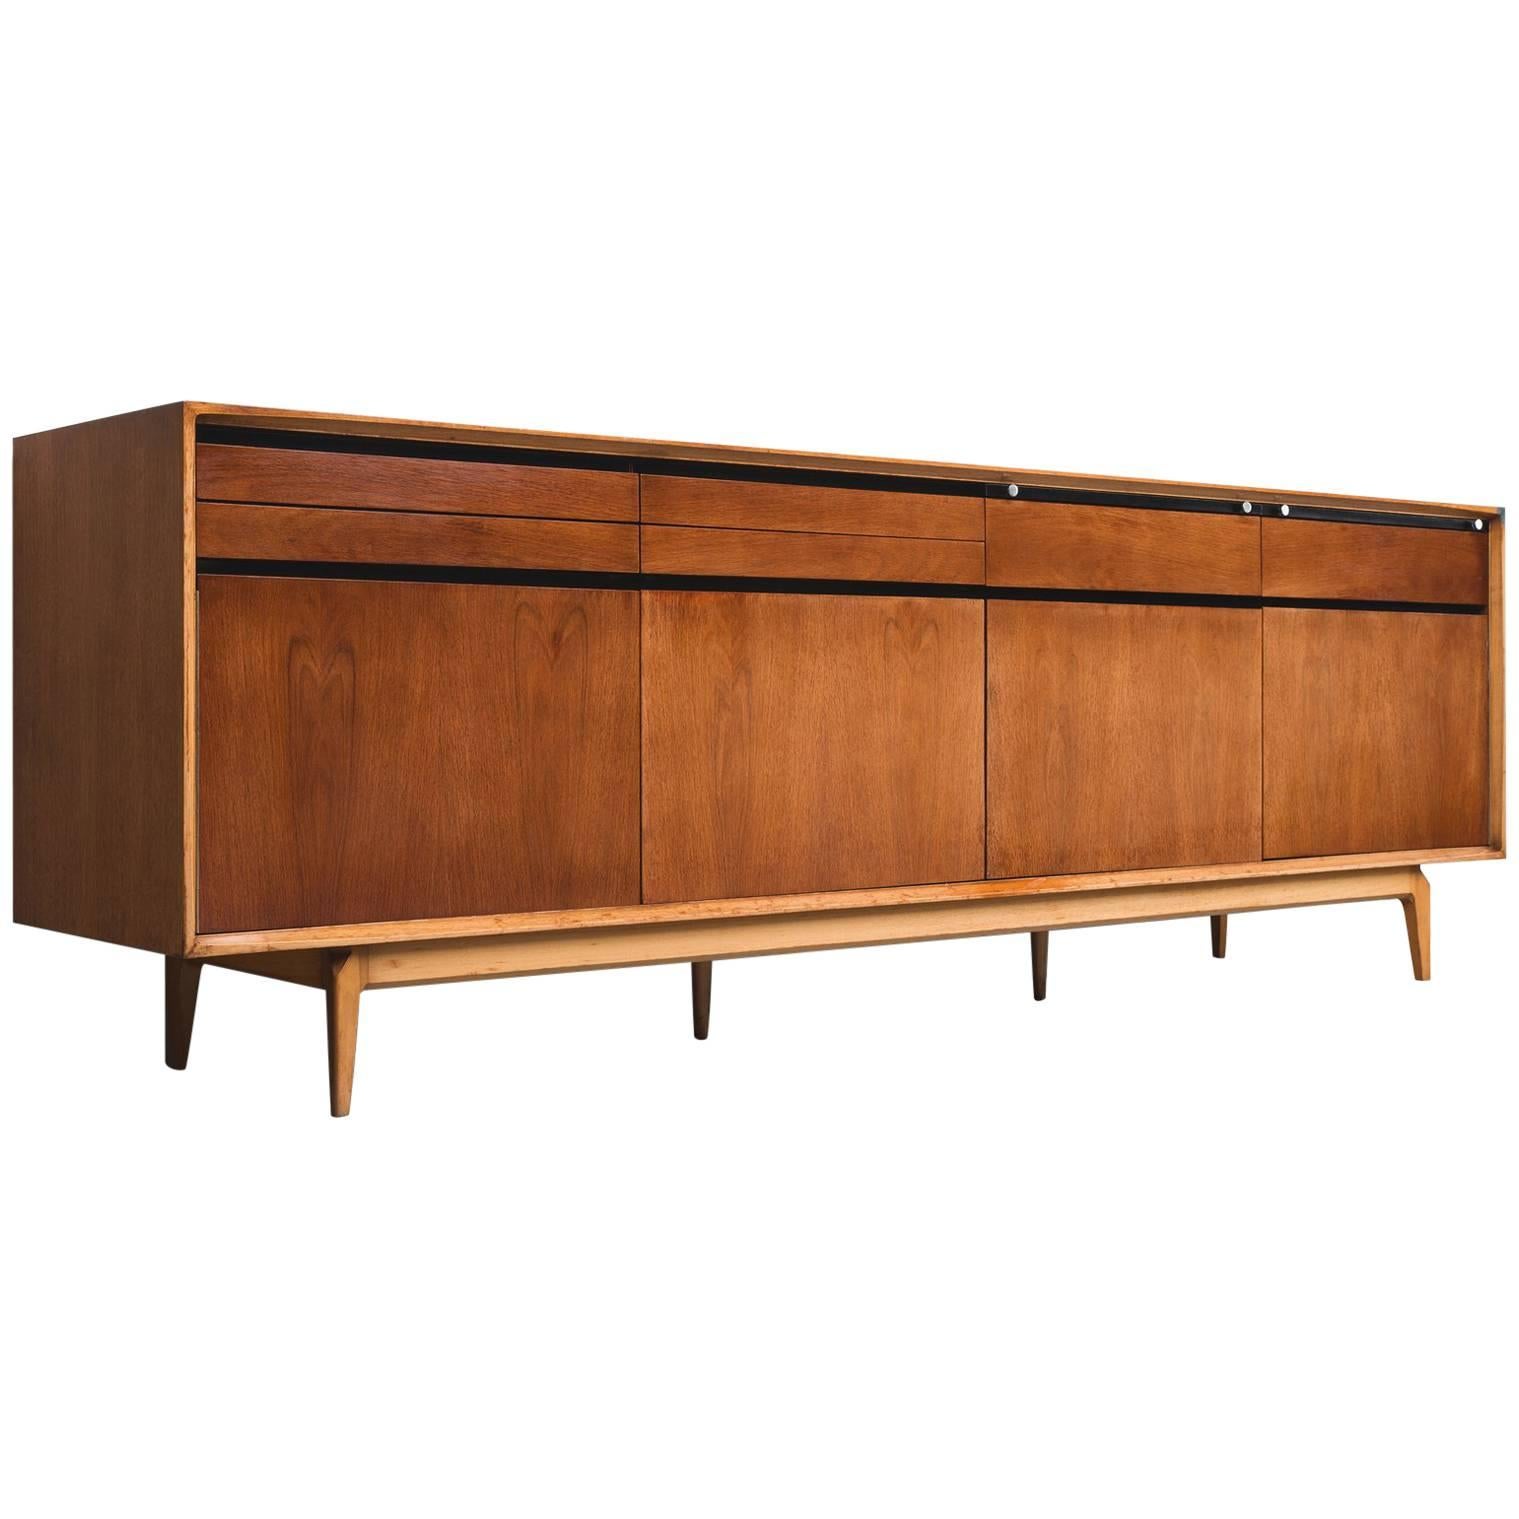 De Coene 'Madison' Credenza in Rosewood and Walnut